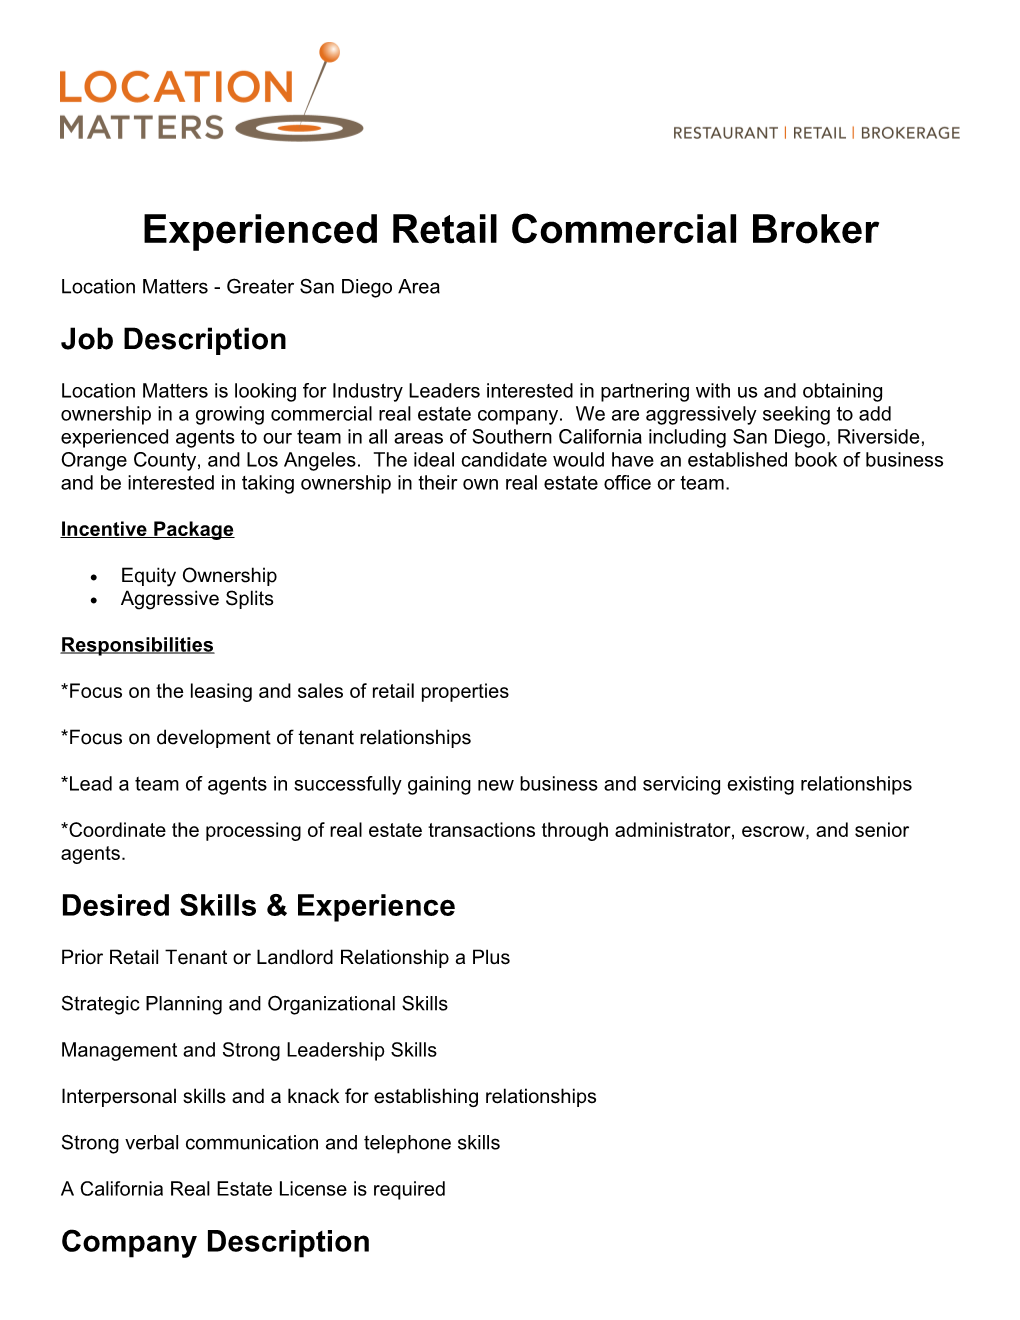 Experienced Retail Commercial Broker